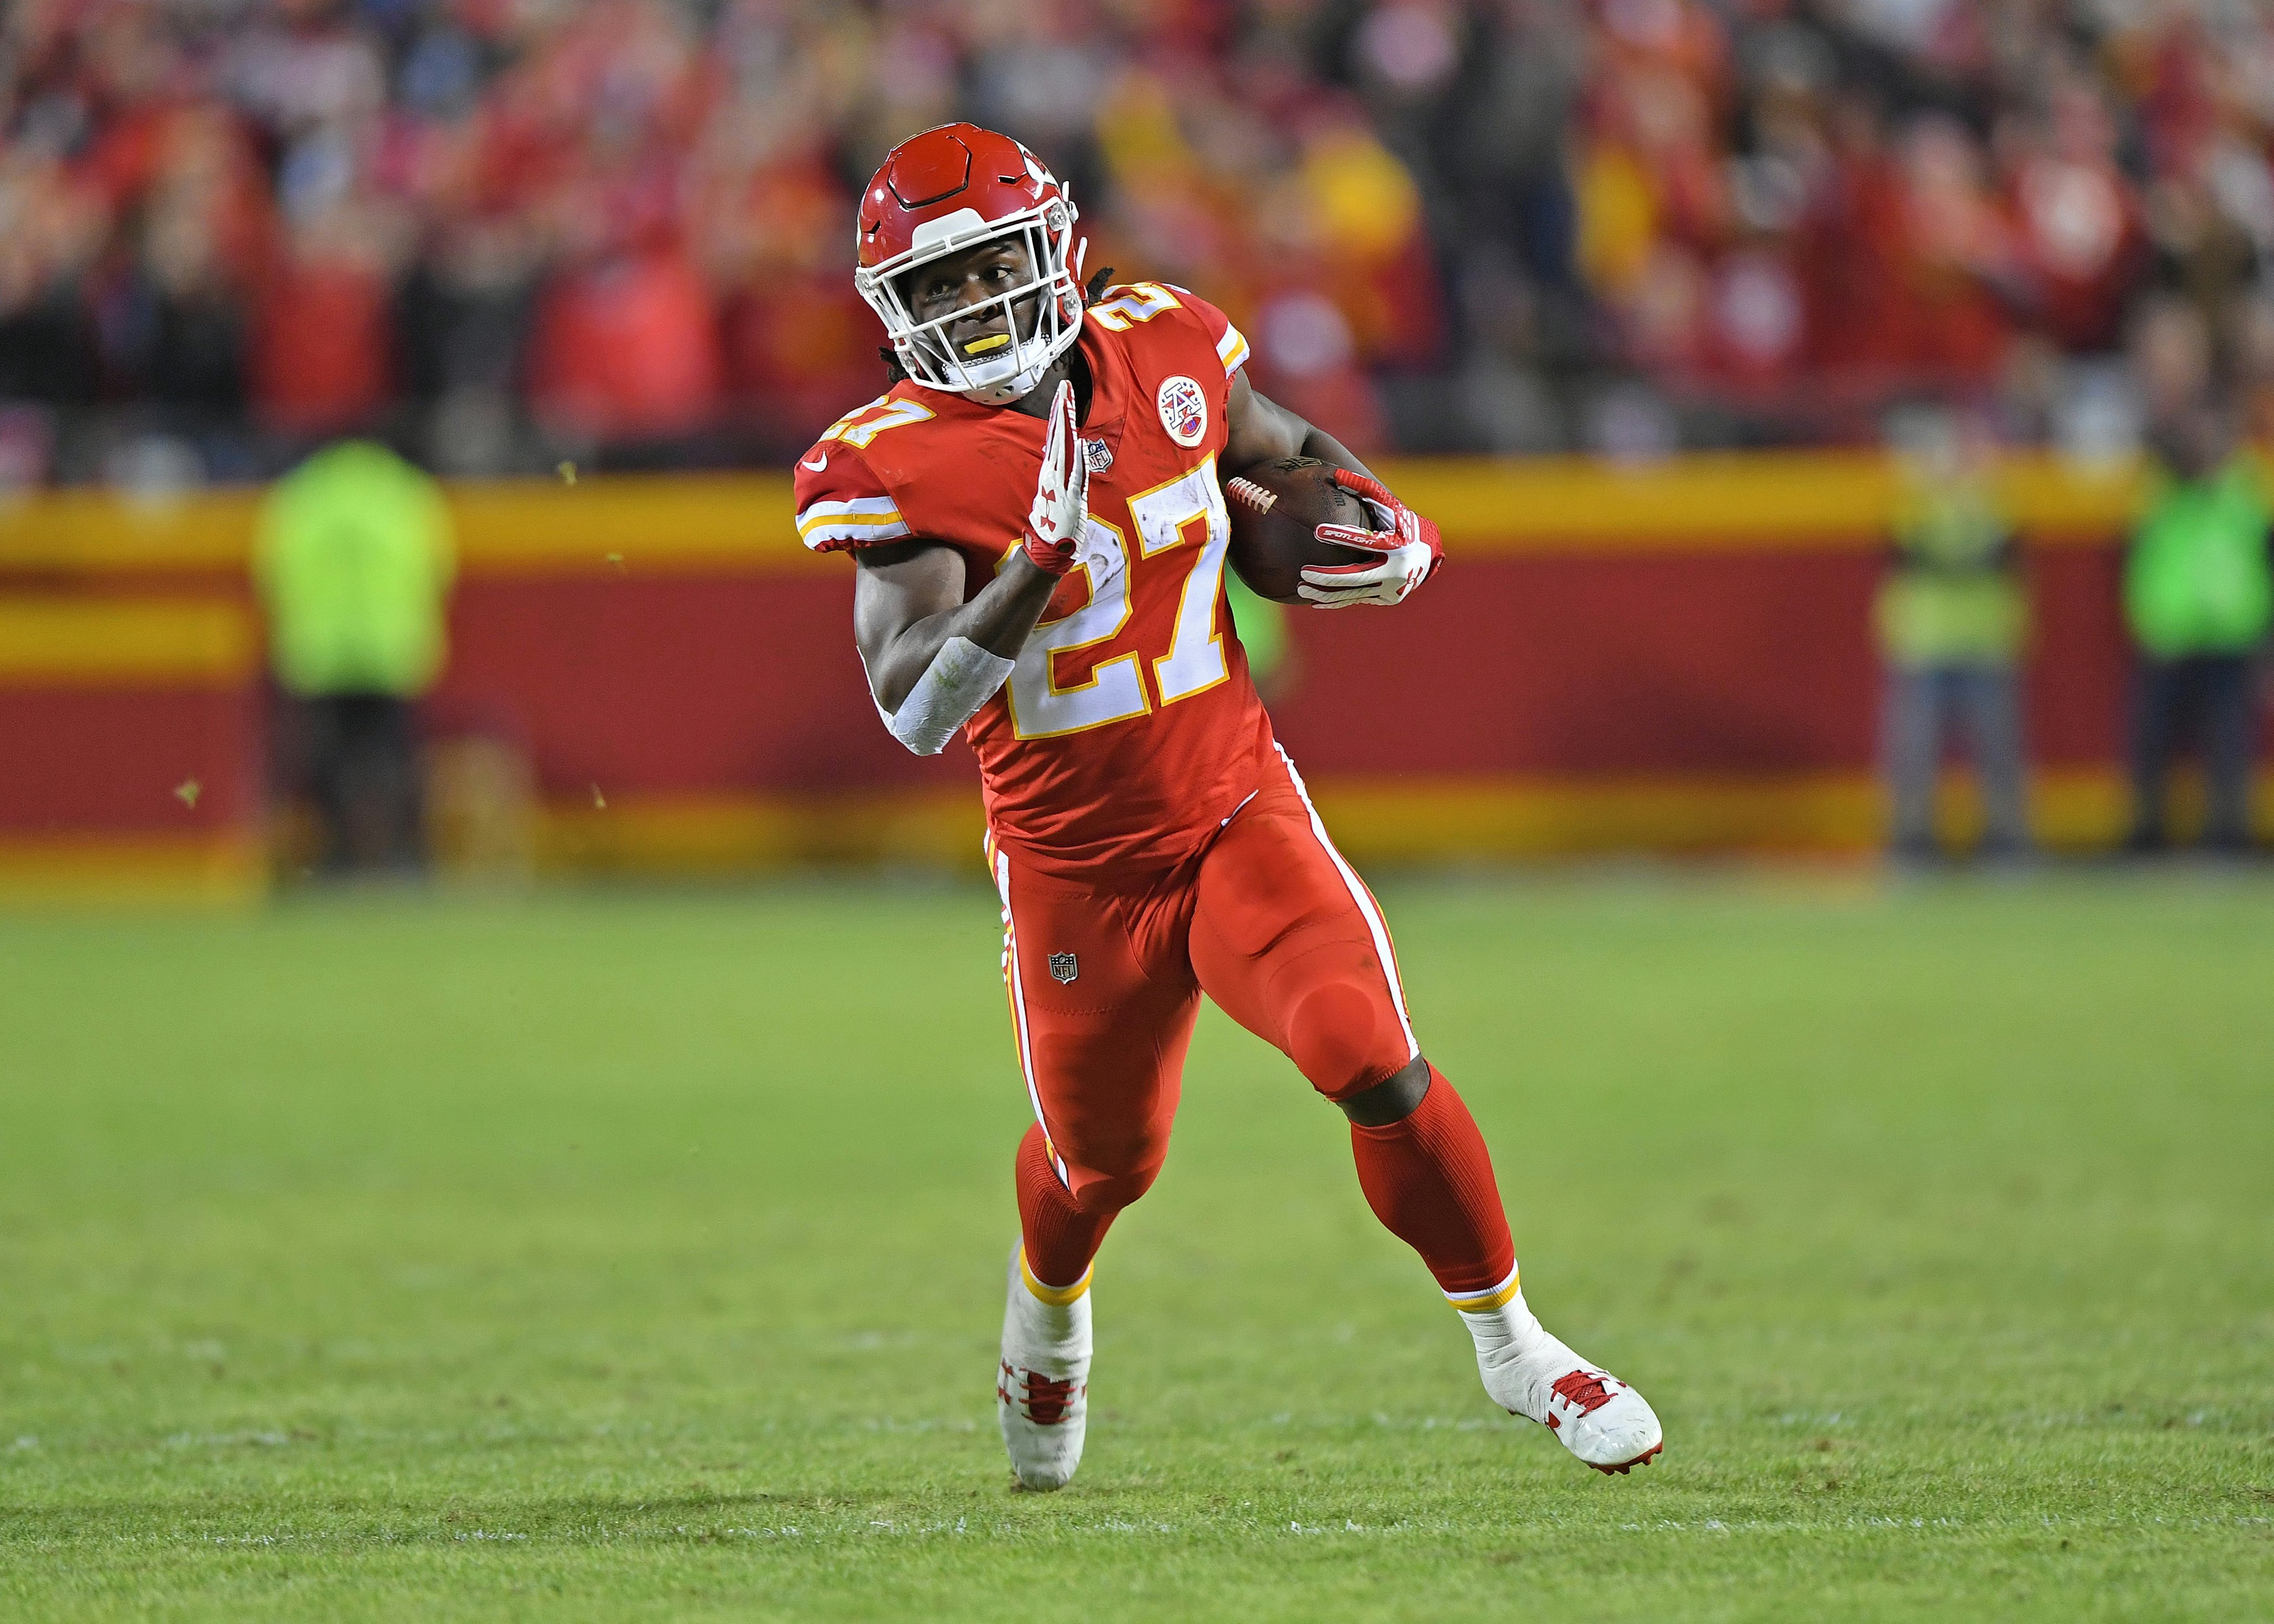 Kansas City Chiefs: Running backs who will make the roster in 2018 - Page 2